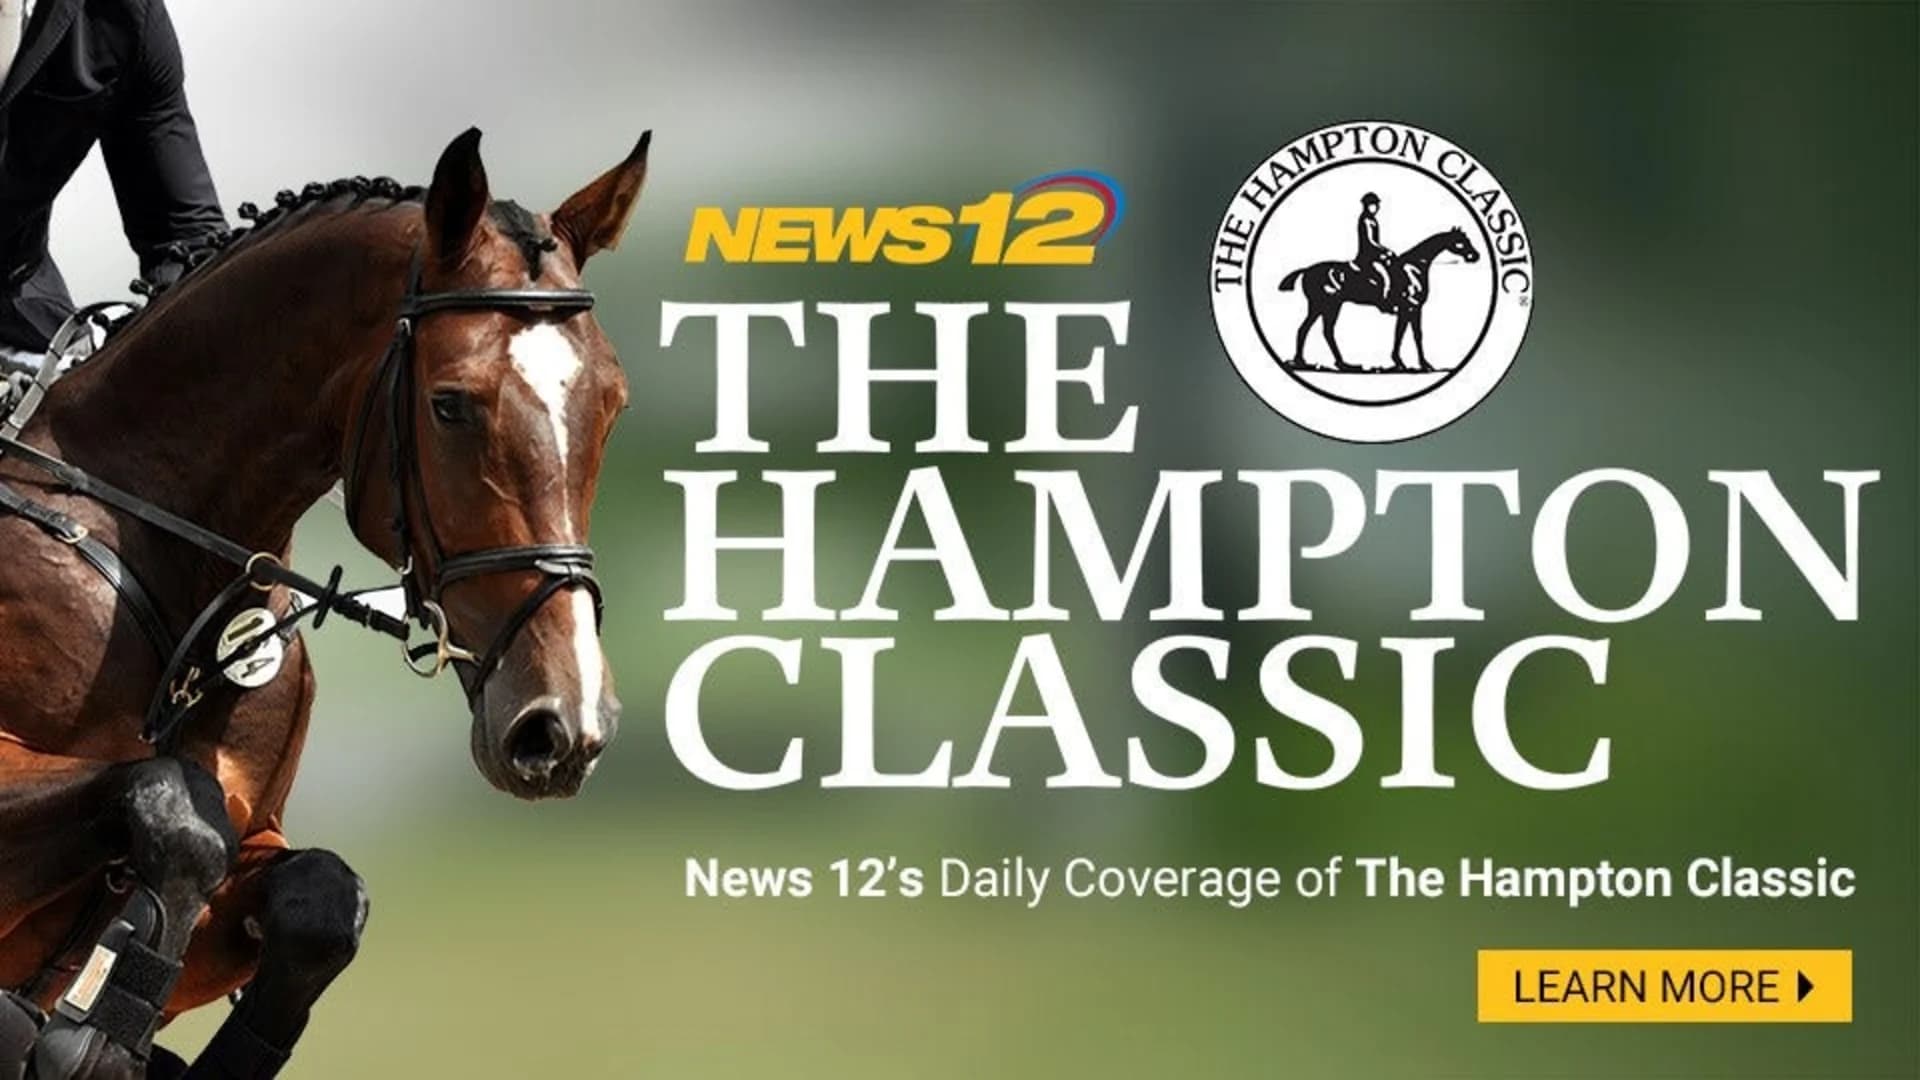 Hampton Classic Horse Show to offer fun, games for kids